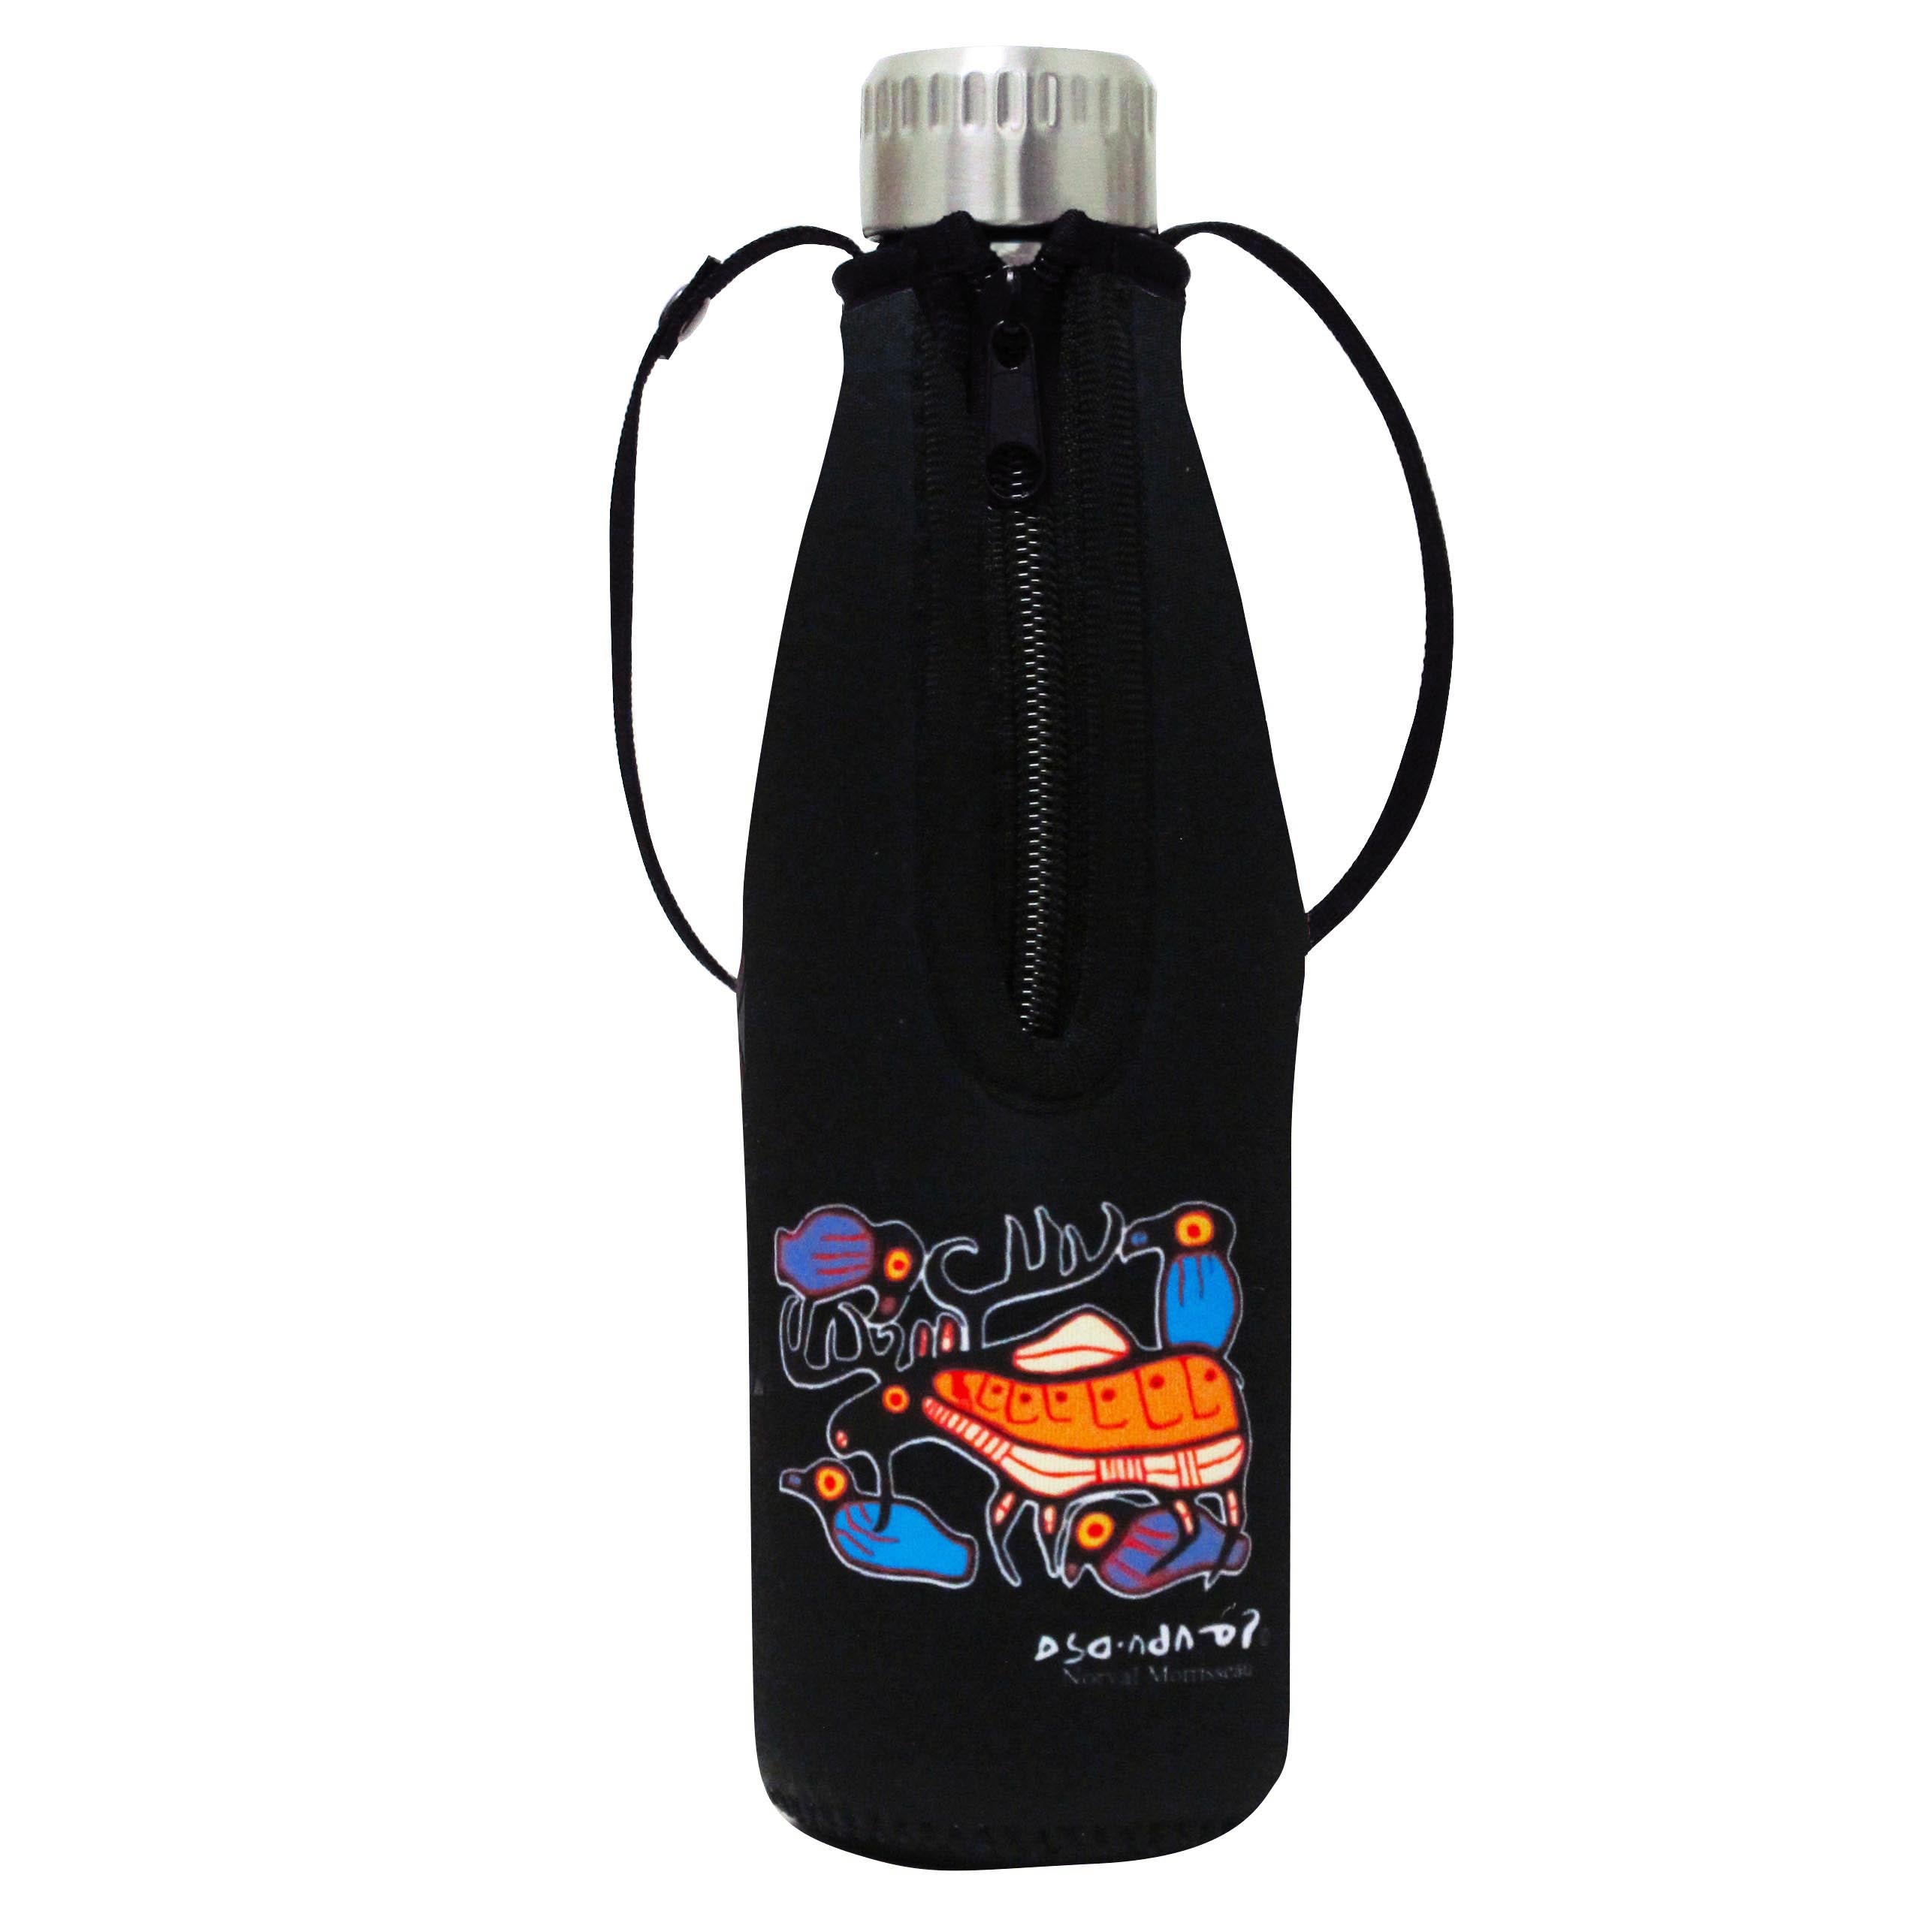 Norval Morrisseau Moose Harmony Water Bottle and Sleeve